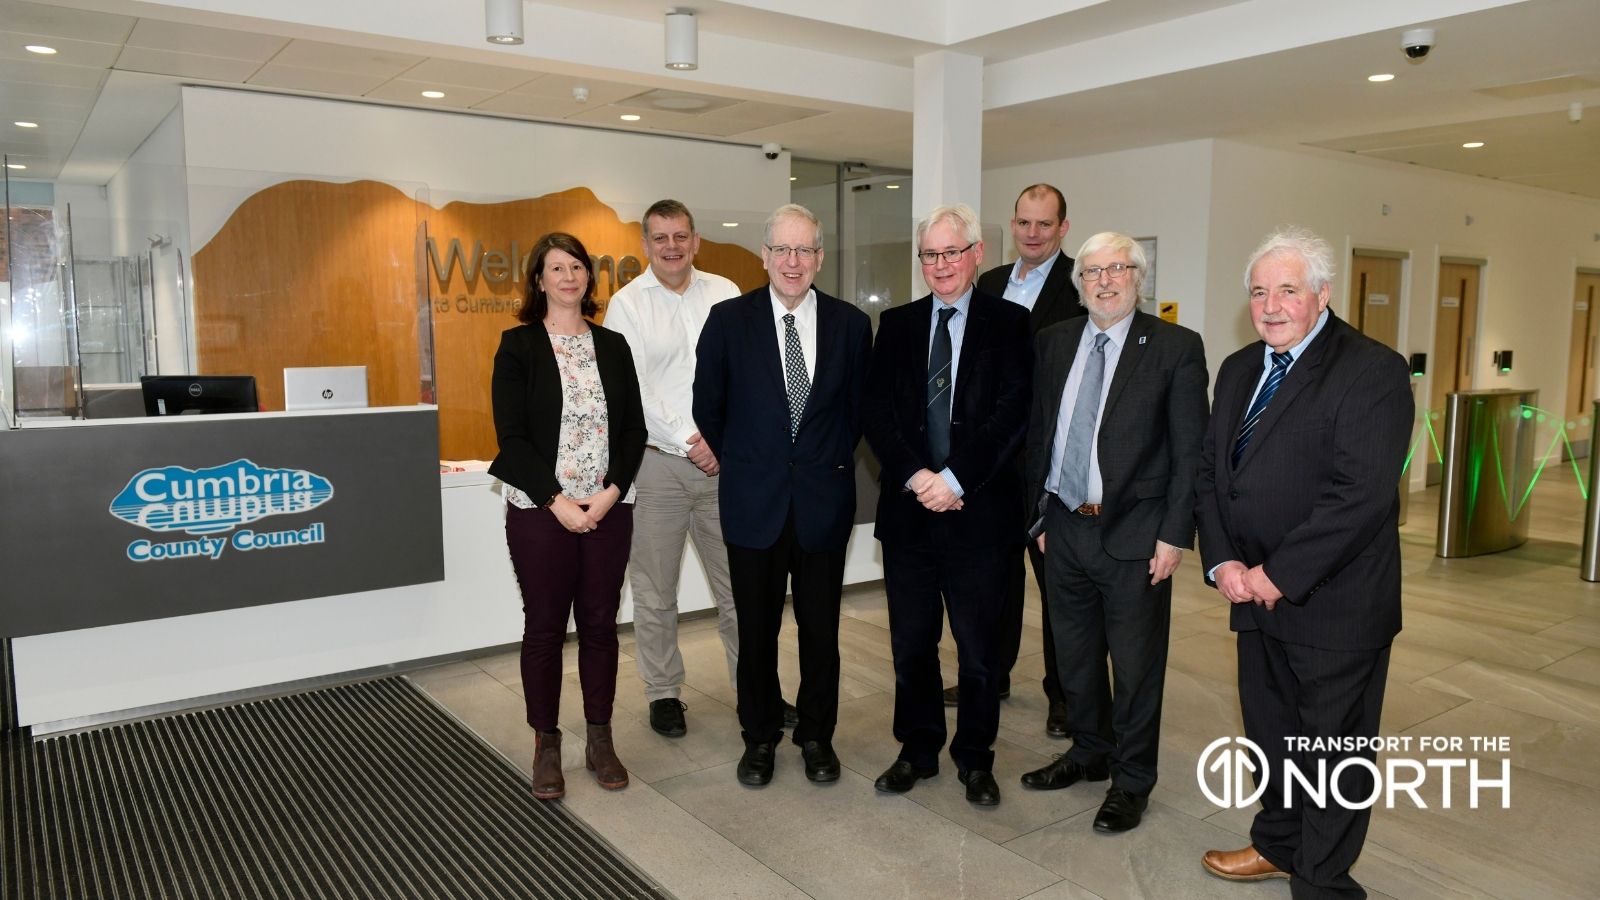 Angela Jones (exec director for economy and infrastructure), Martin Tugwell, Lord Patrick McLoughlin, Cllr Stewart Young, Phil Greenup (assistant director for economy and infrastructure) , Cllr Peter Thornton and Cllr Keith Little at Cumbria County Council’s offices in Carlisle